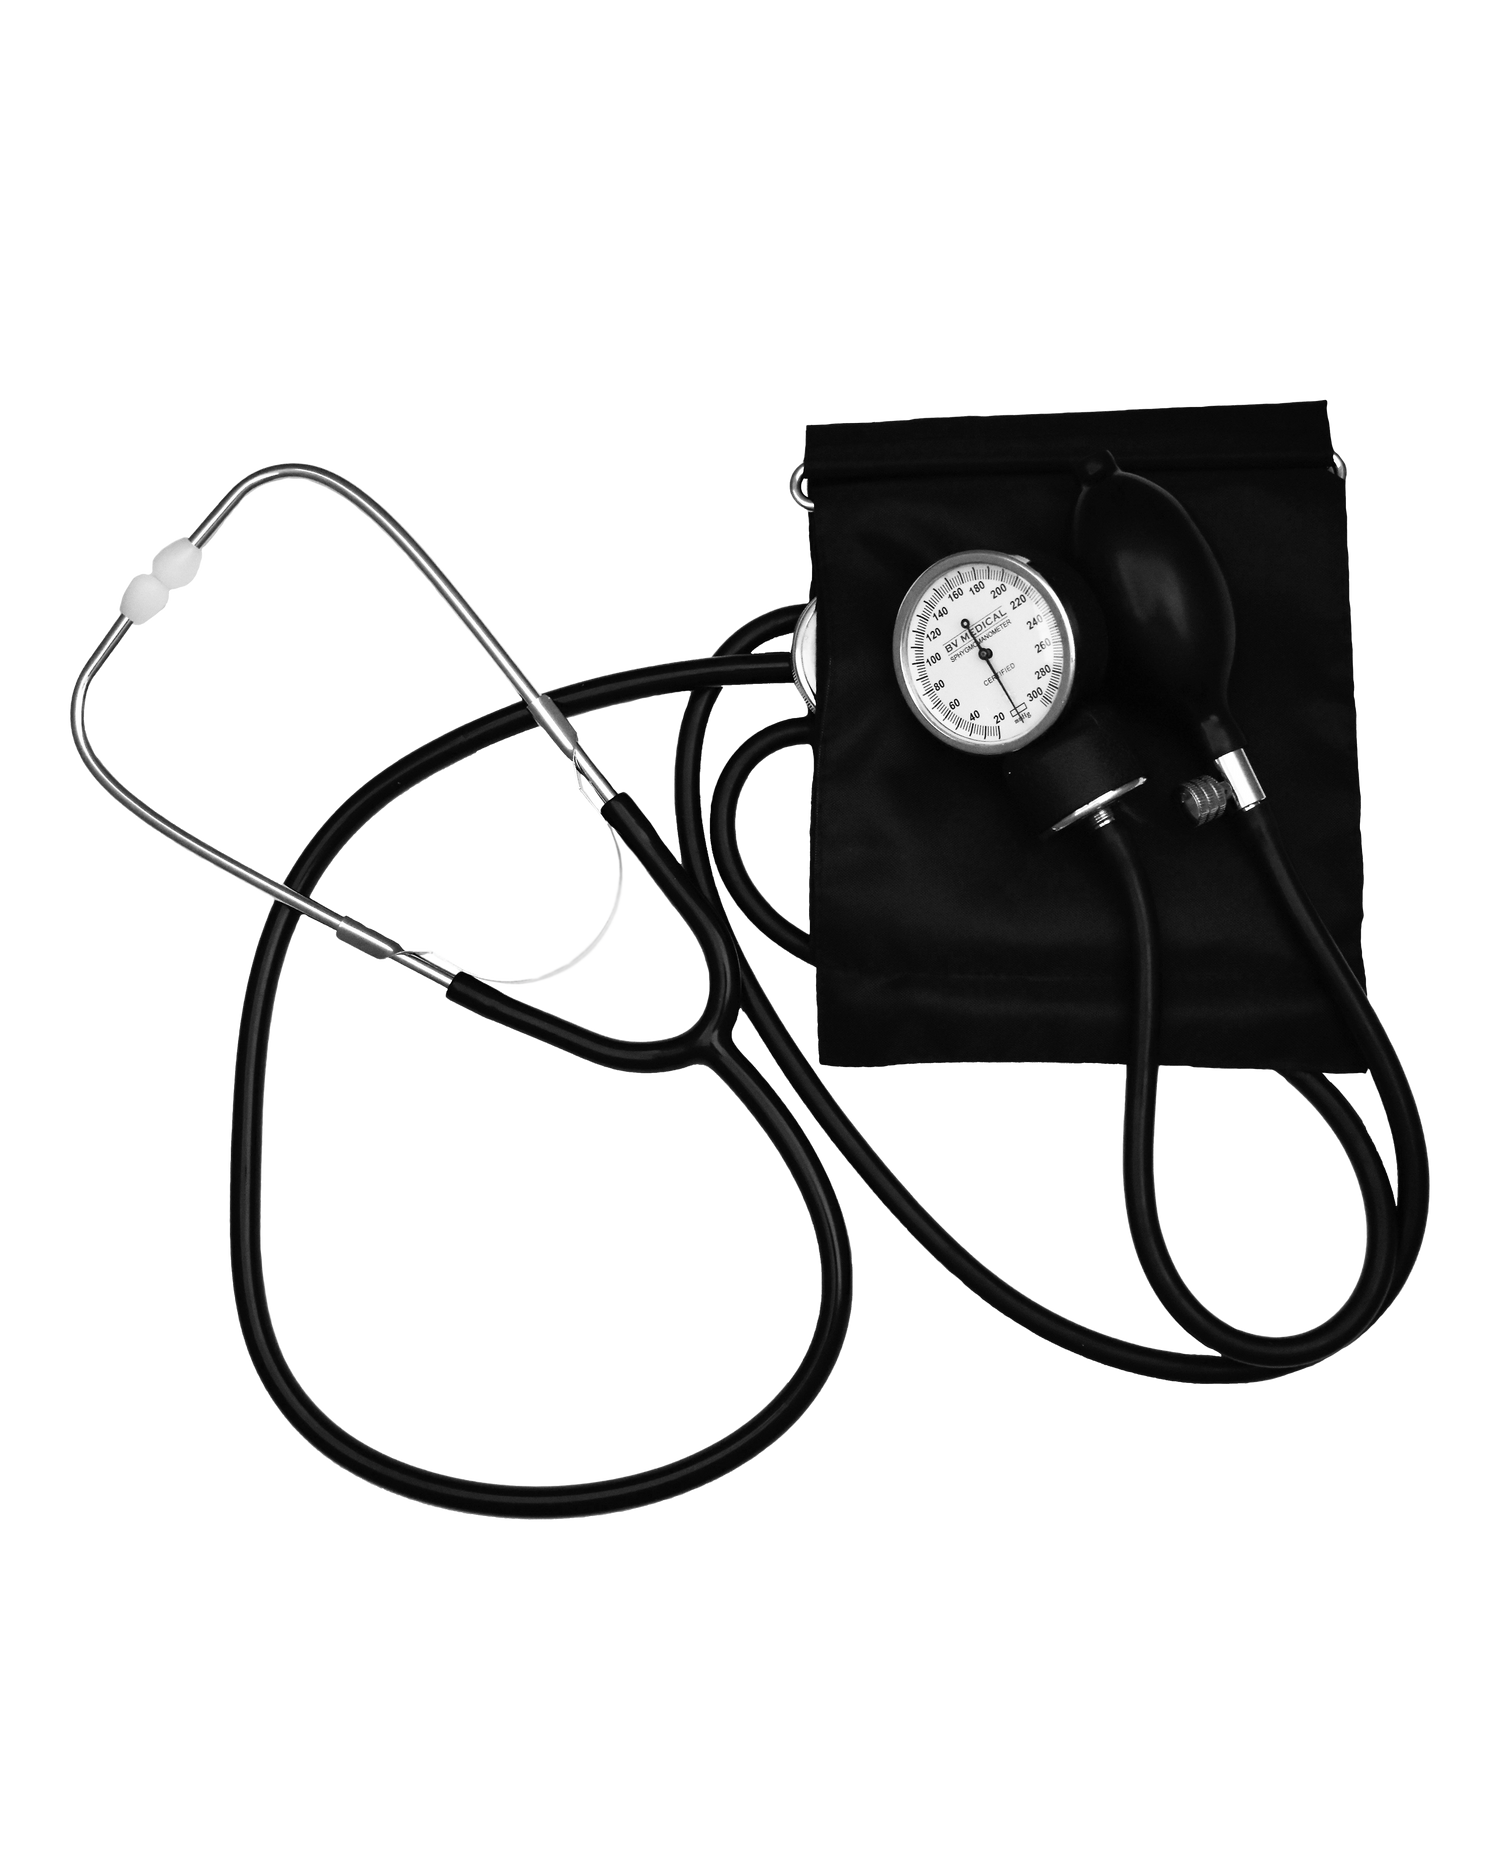 Blood Pressure Monitor Cuff – My Home Medical Supplies